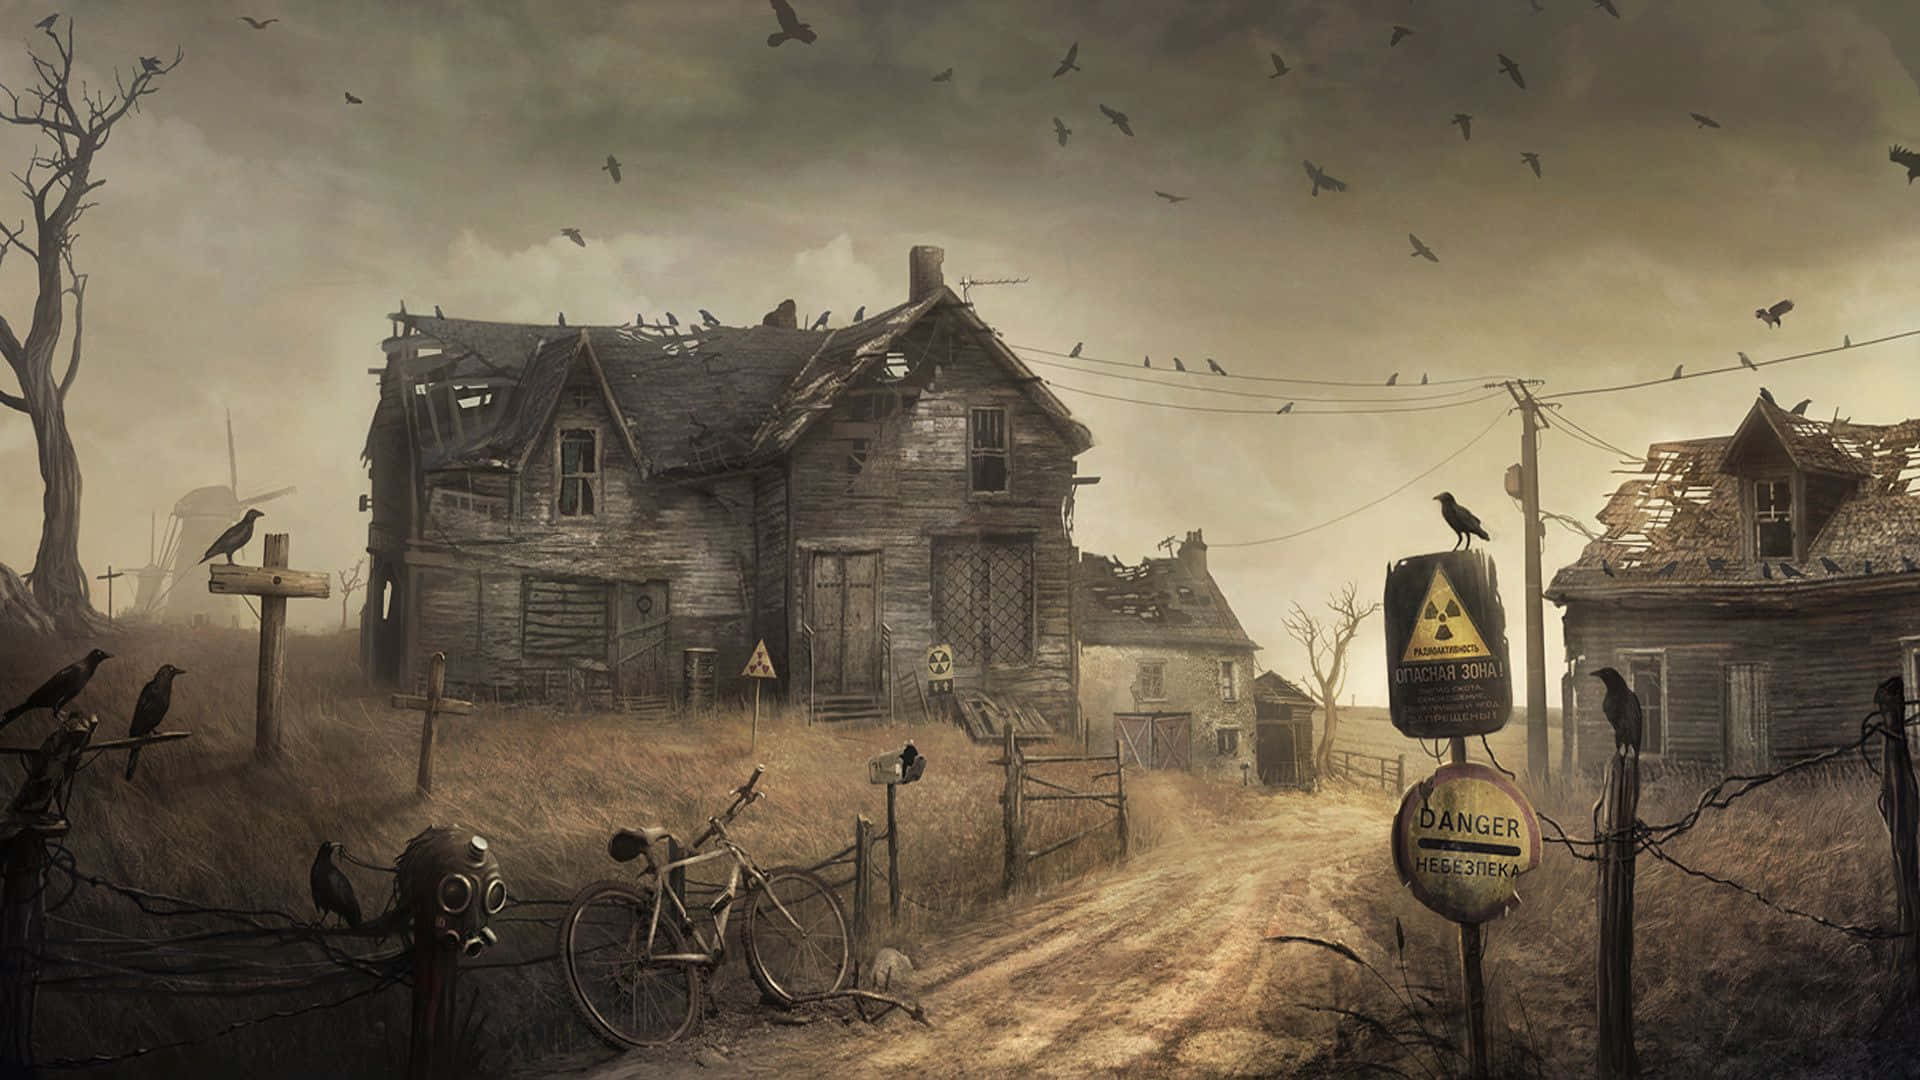 A Dark, Creepy, And Spooky Painting Of A House And Crows Wallpaper